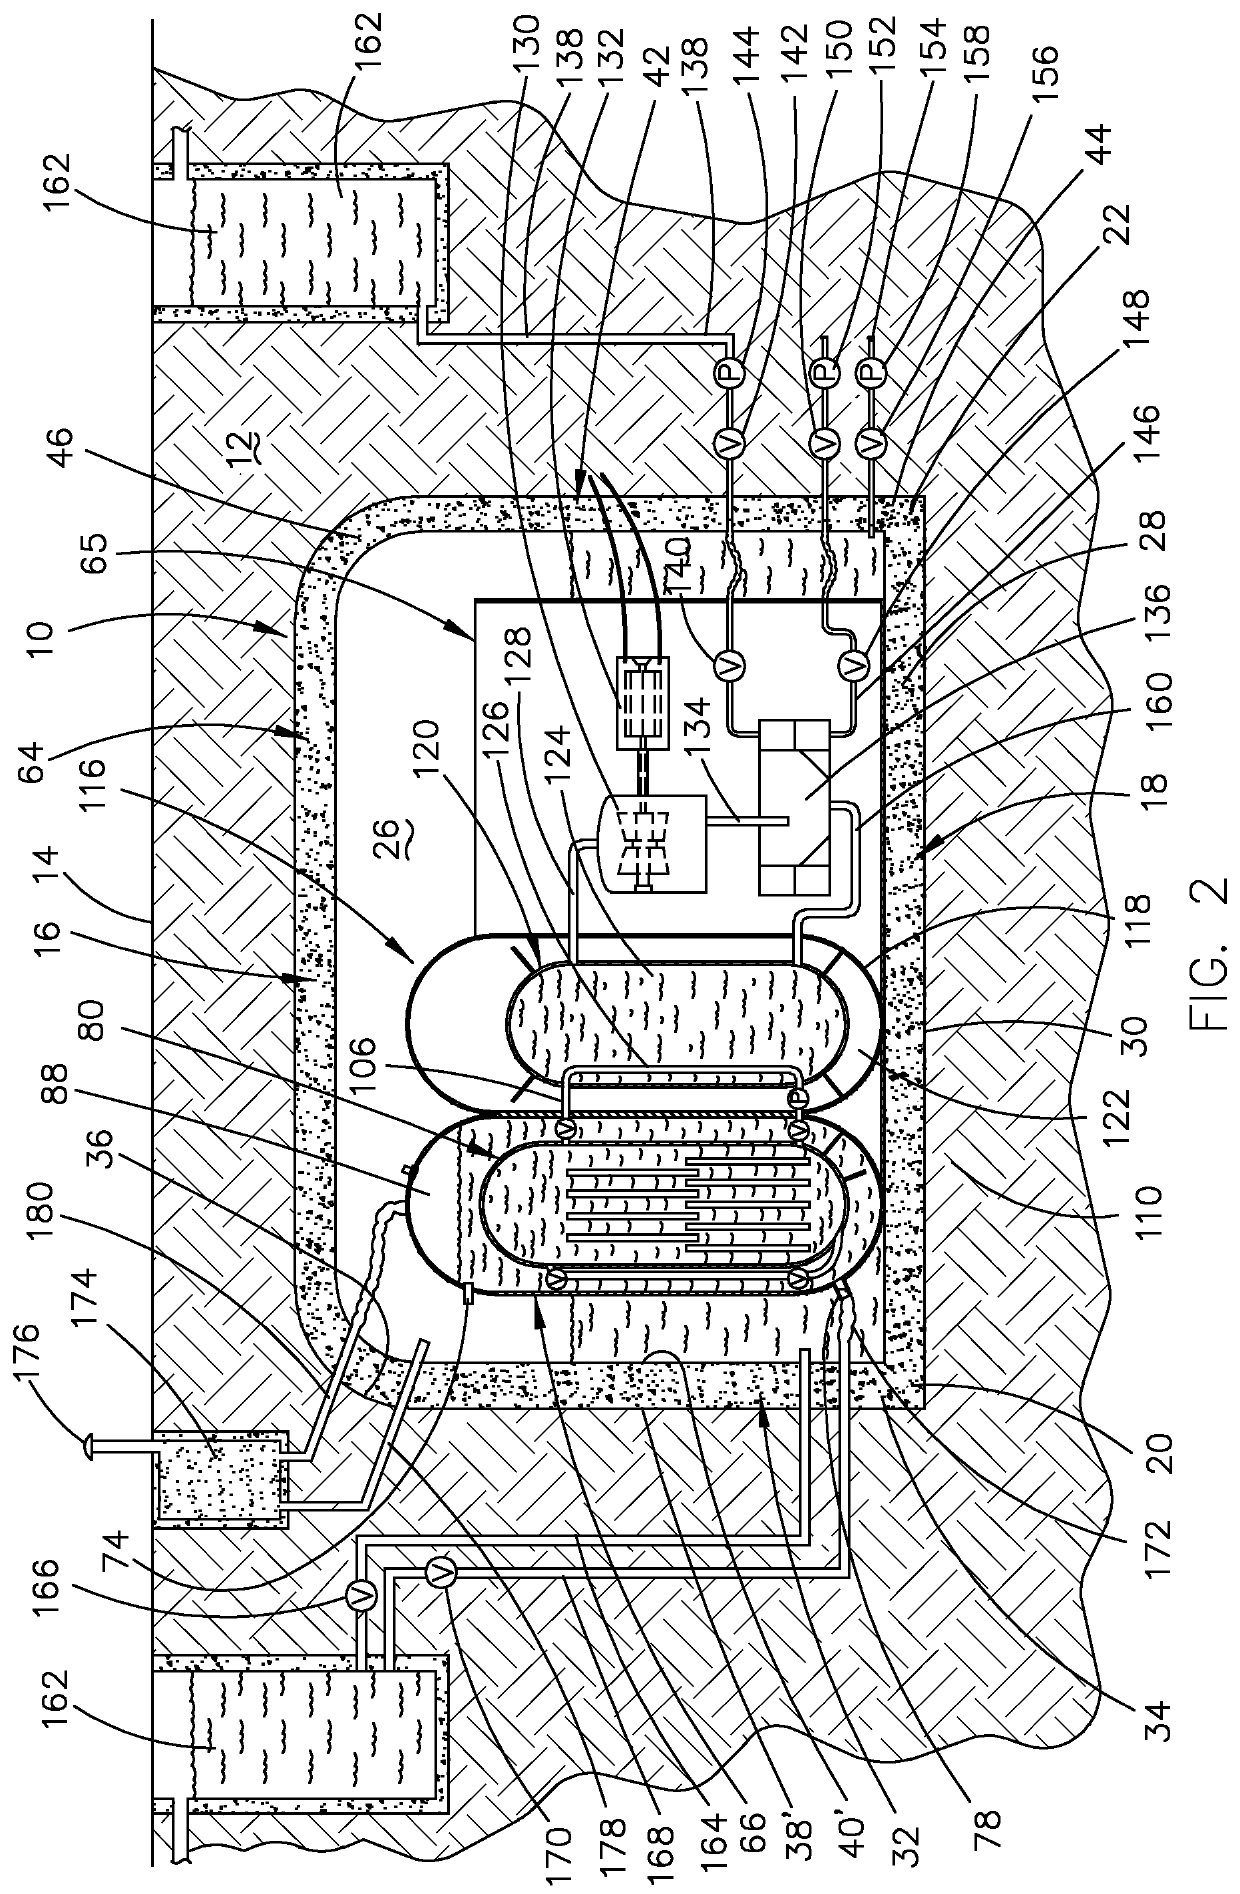 Double containment nuclear power reactor with passive cooling and radiation scrubbing